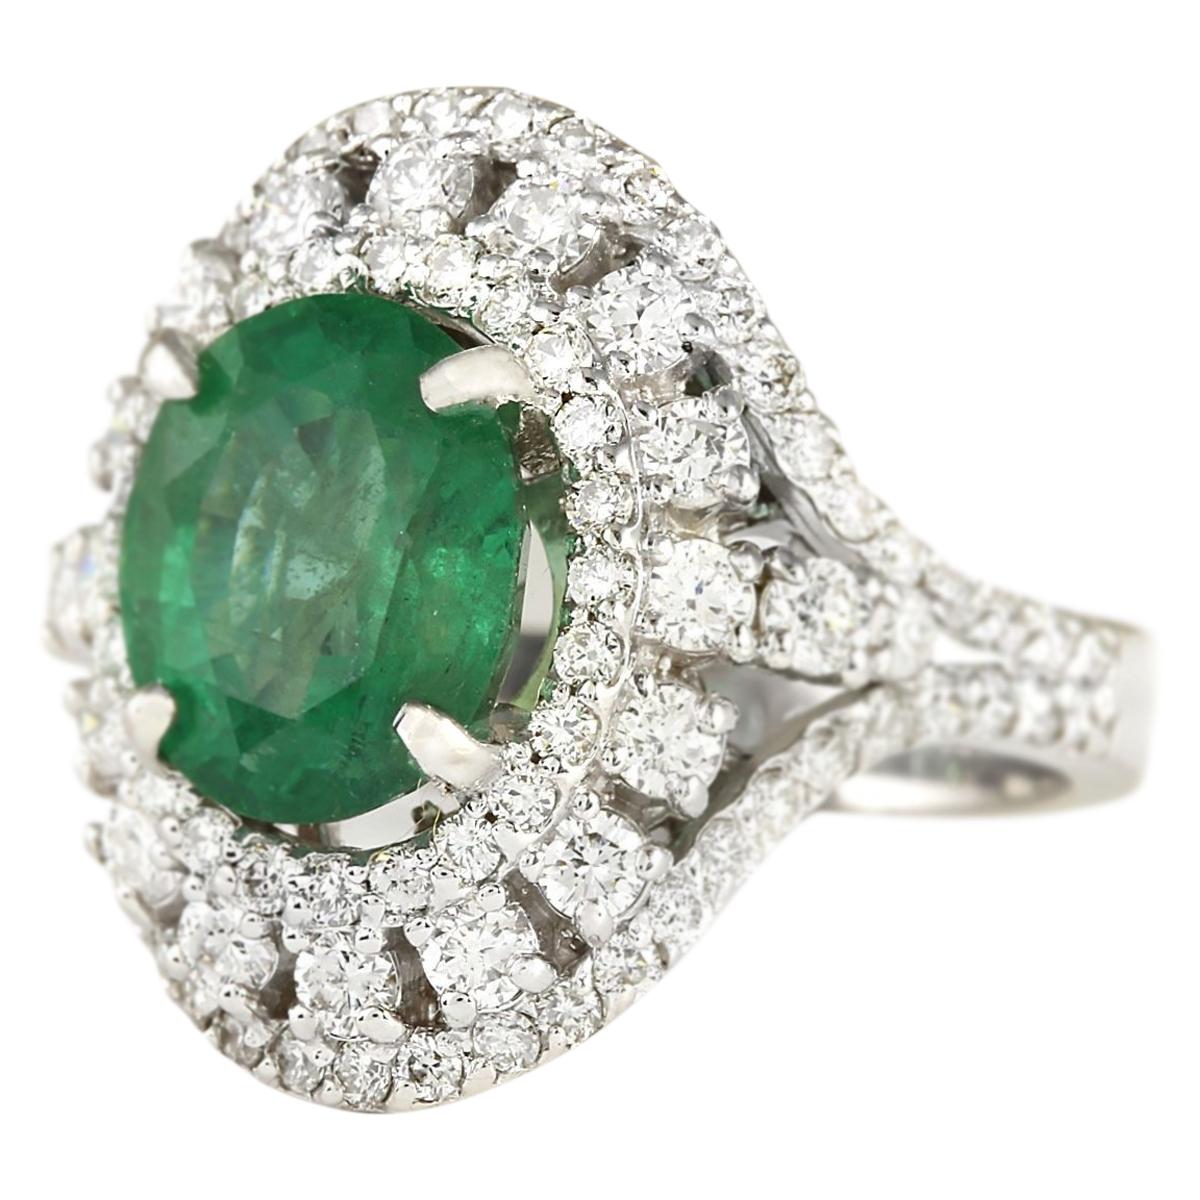 Stamped: 14K White Gold
Total Ring Weight: 8.0 Grams
Total Natural Emerald Weight is 3.13 Carat (Measures: 10.00x8.00 mm)
Color: Green
Total Natural Diamond Weight is 1.70 Carat
Color: F-G, Clarity: VS2-SI1
Face Measures: 20.25x18.45 mm
Sku: